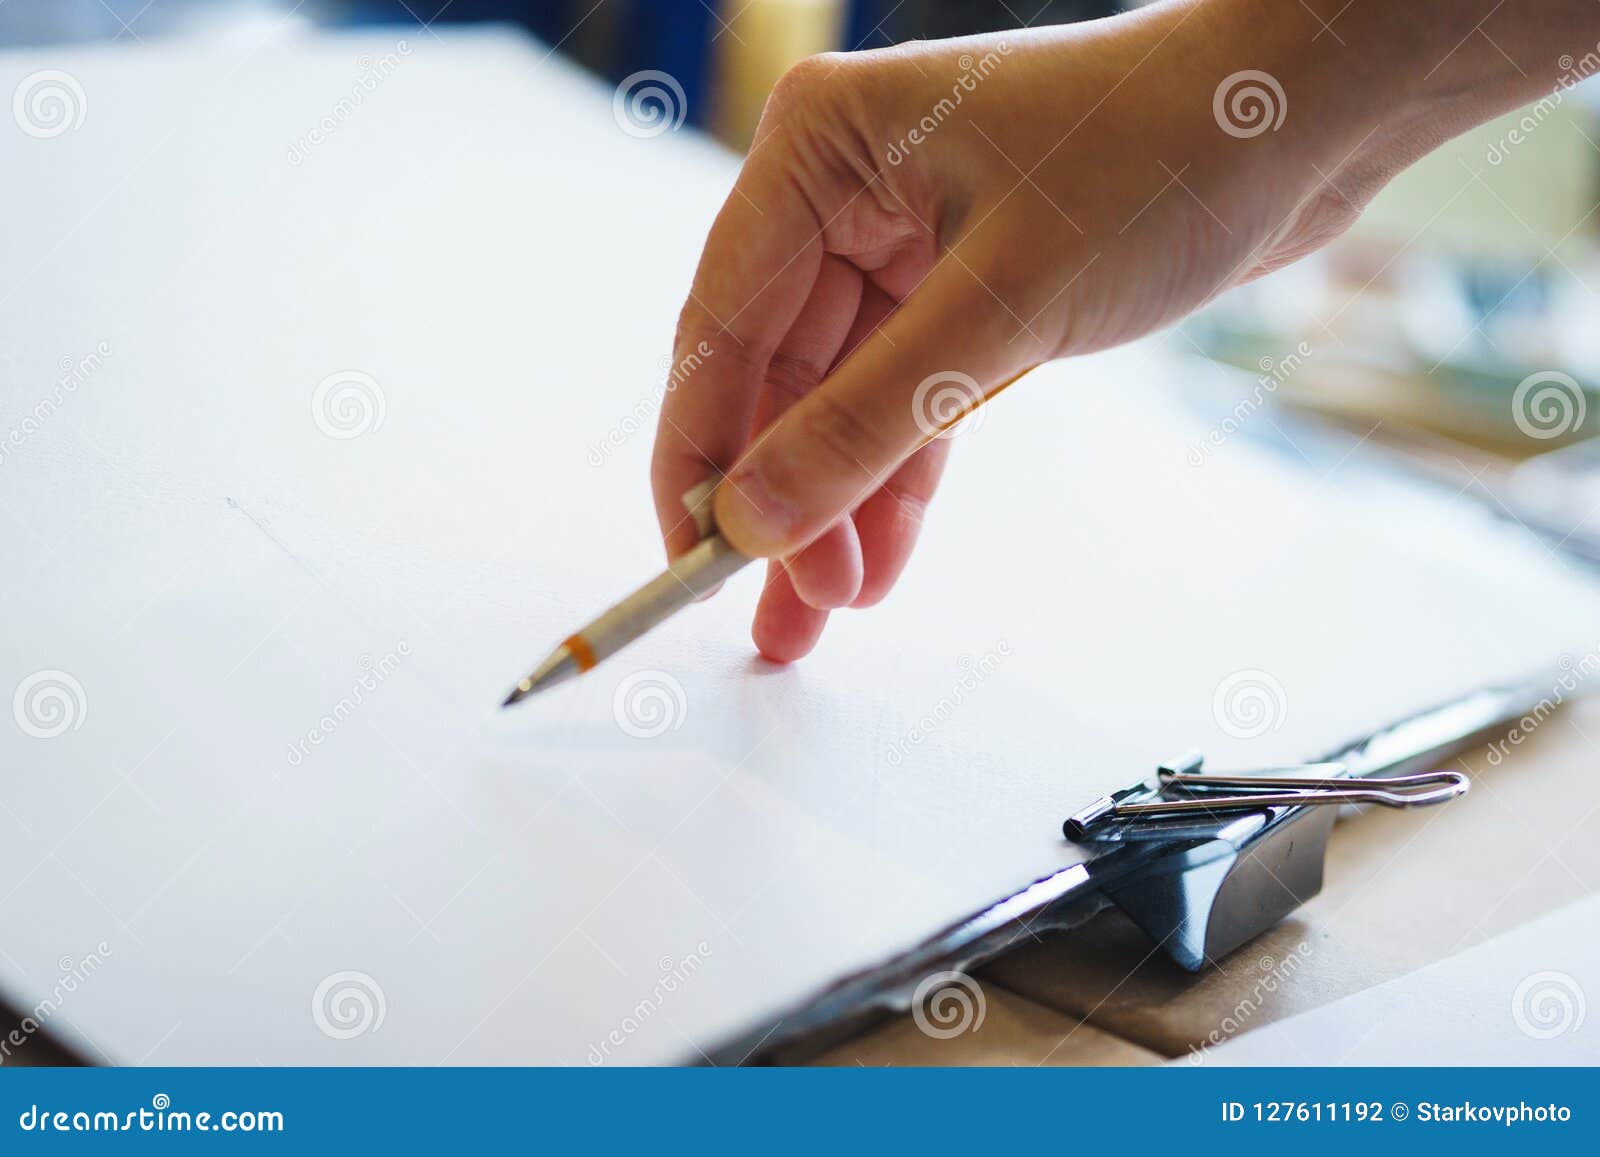 Artist with a Pencil Close-up while Drawing a Sketch on Clean Paper ...